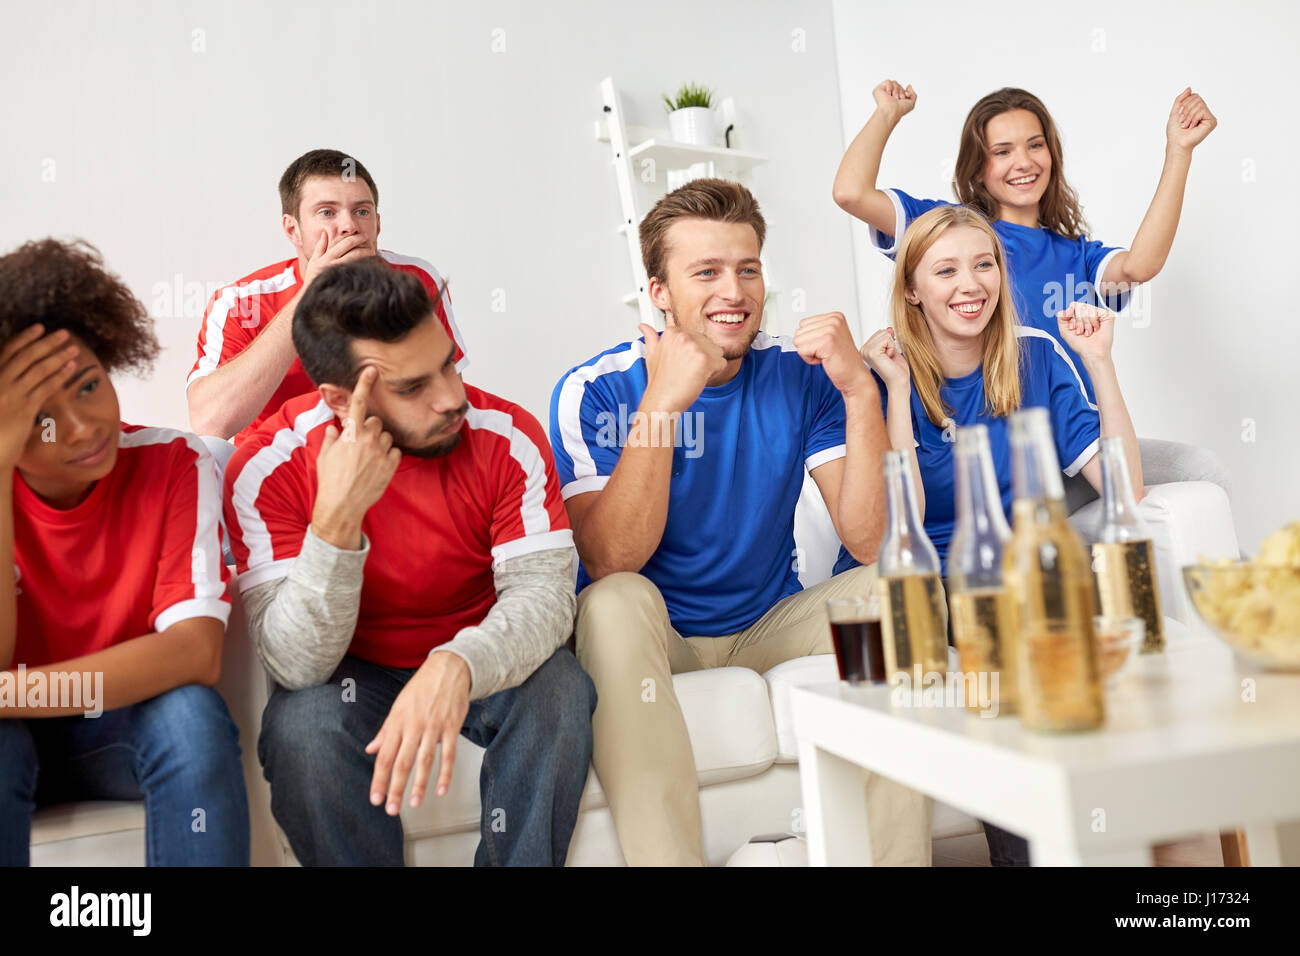 friends or football fans watching soccer at home Stock Photo